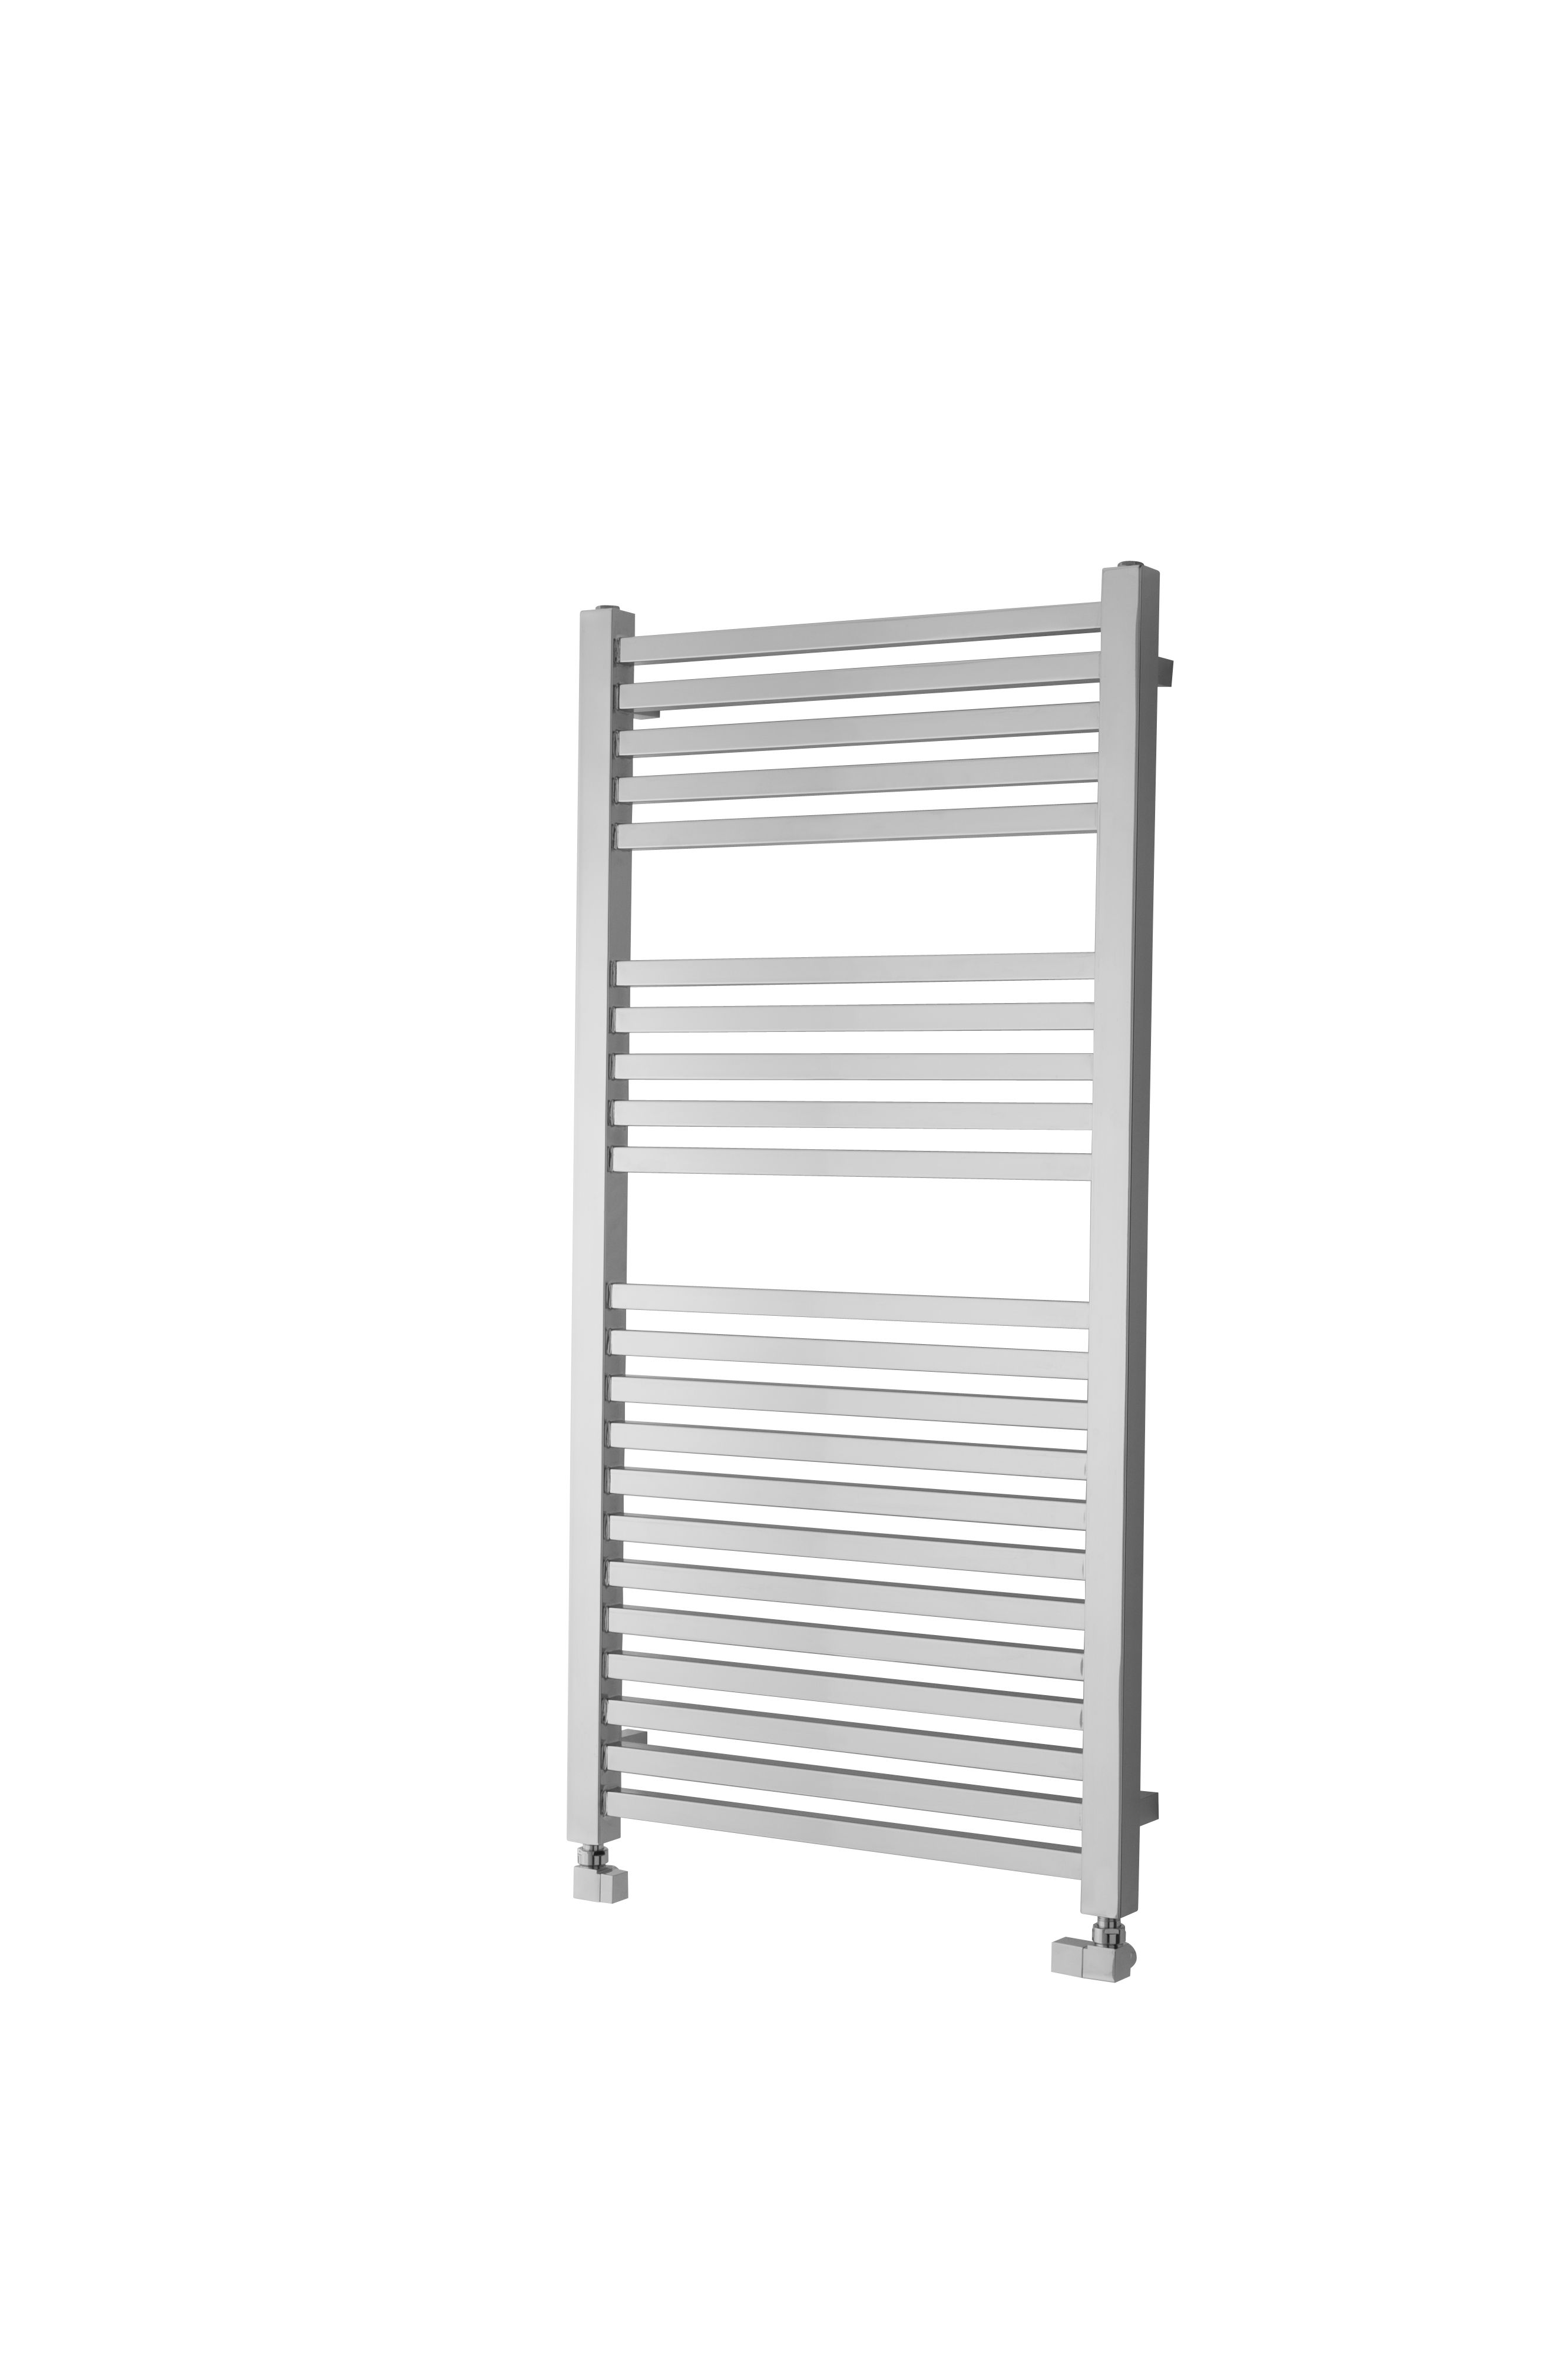 Towelrads Square Chrome Towel Radiator - 1600mm - Various Widths Available